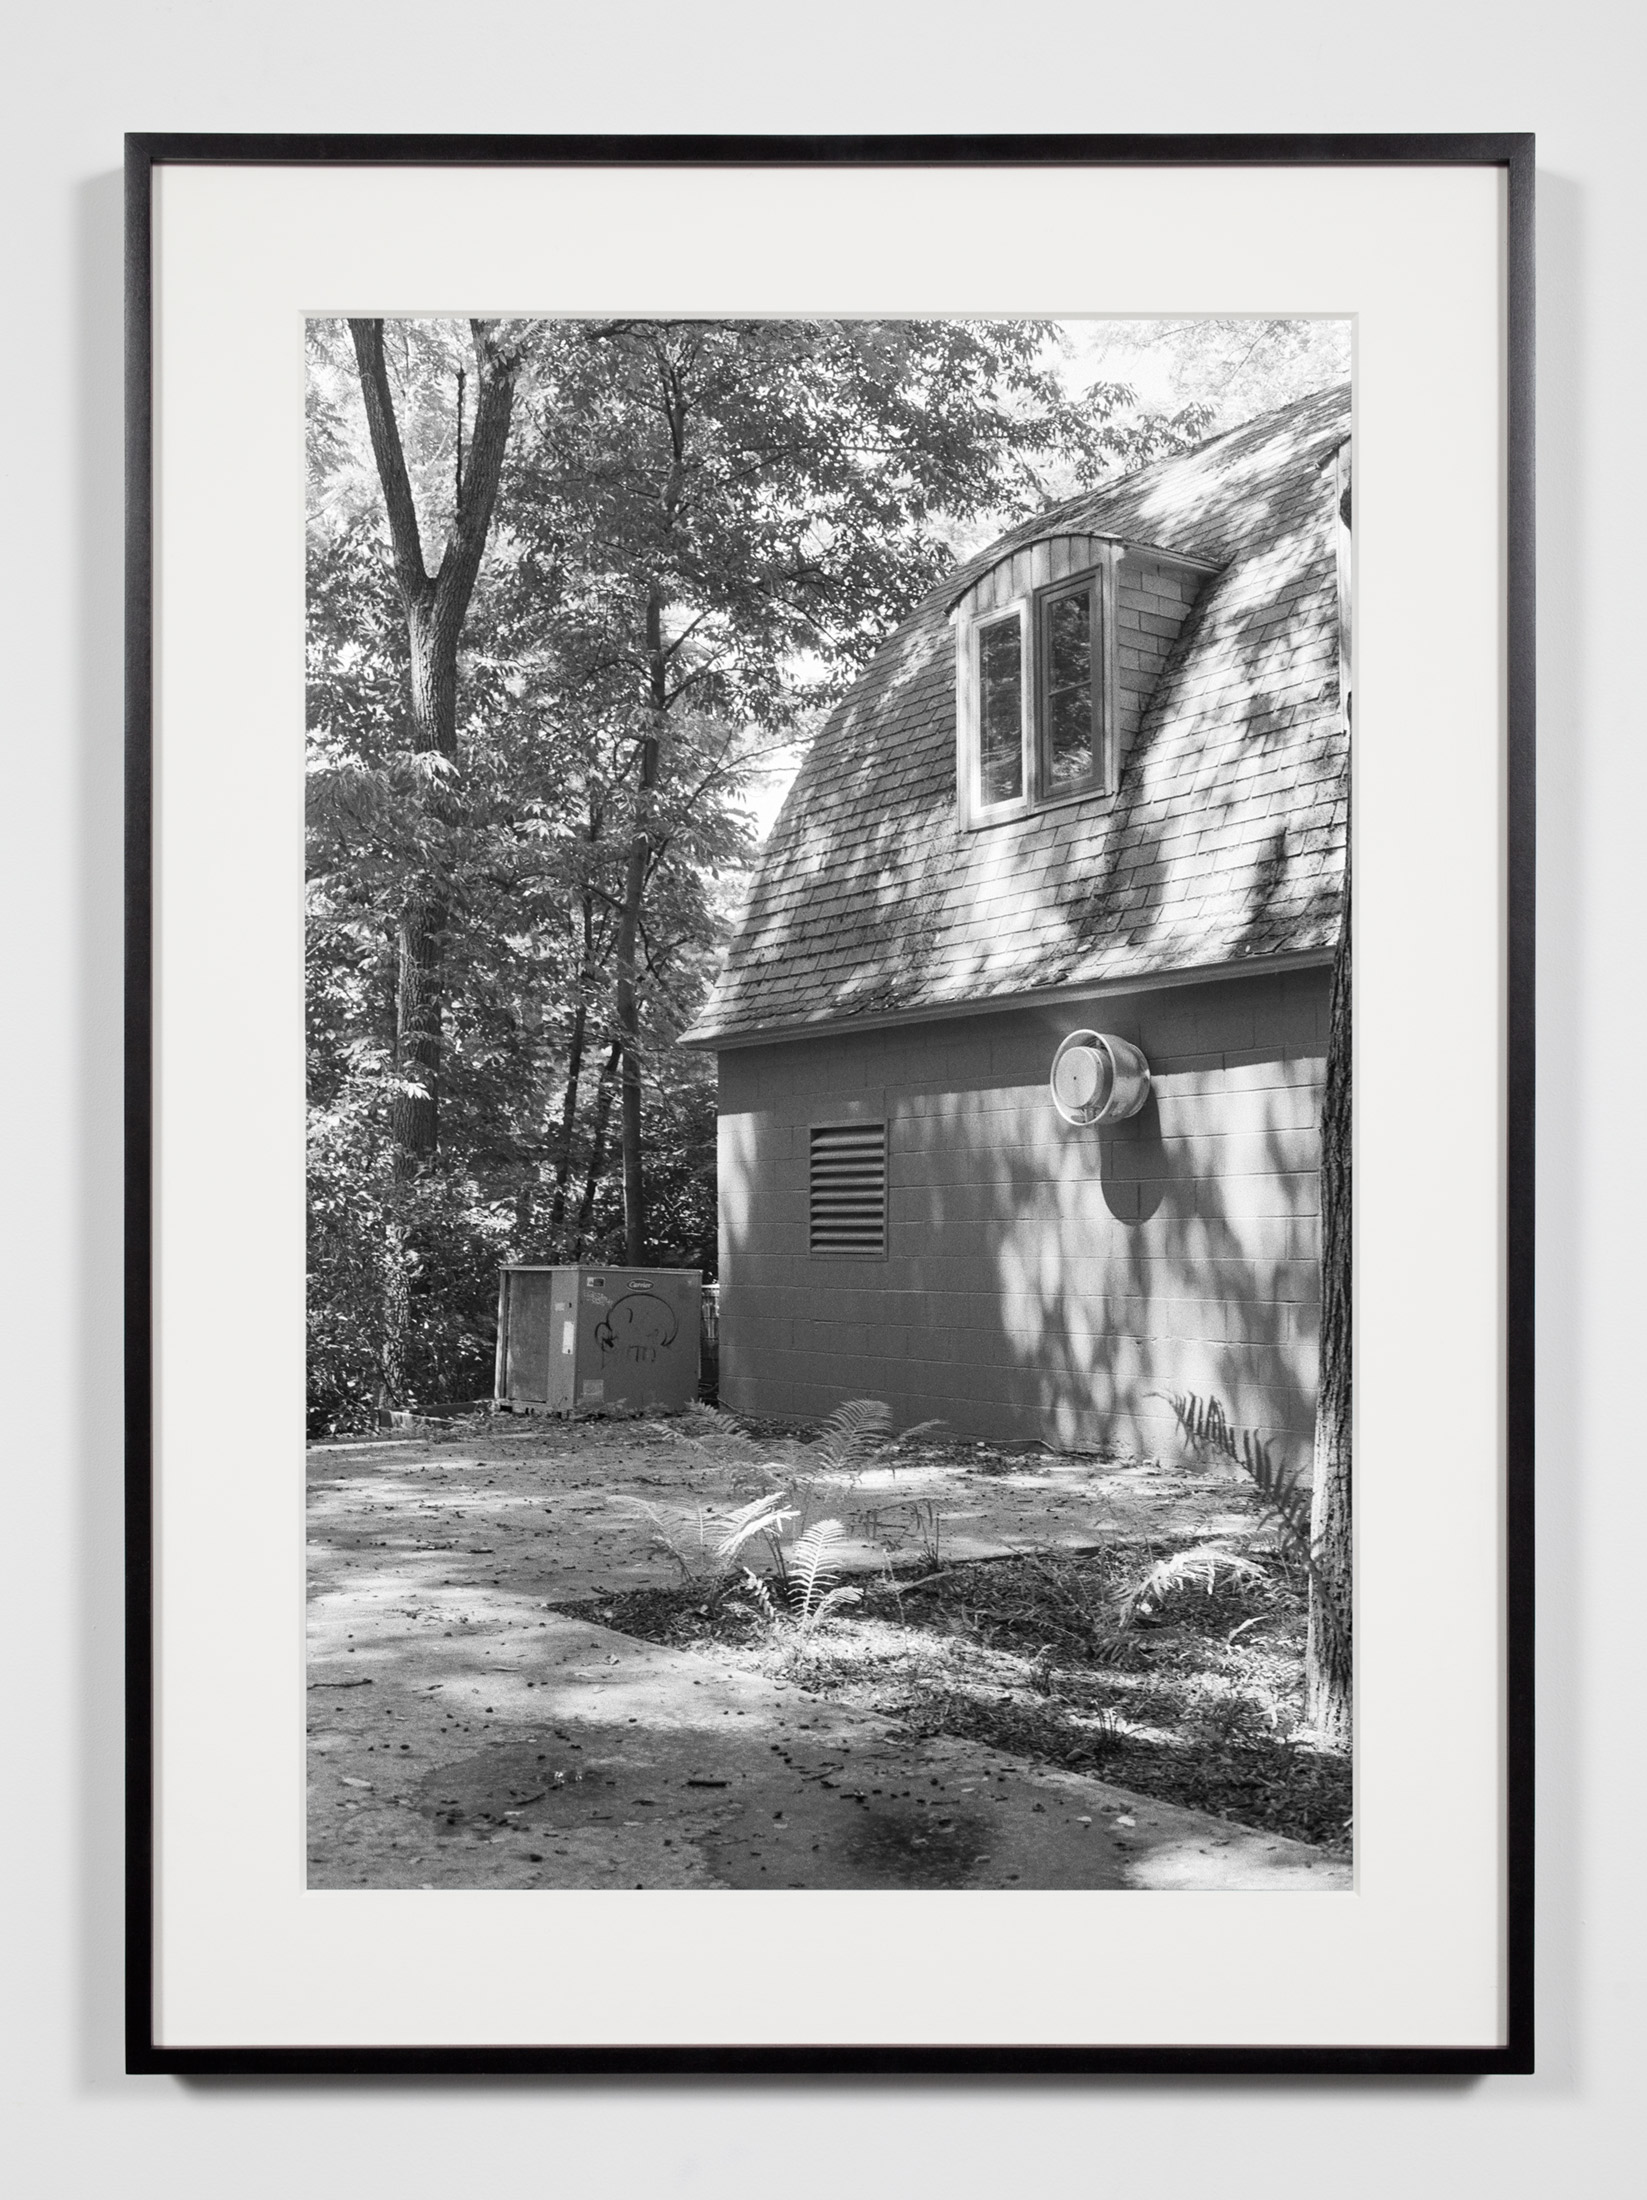   College Darkroom Building, Annandale-on-Hudson, New York, July 11, 2009   2011  Epson Ultrachrome K3 archival ink jet print on Hahnemühle Photo Rag paper  36 3/8 x 26 3/8 inches   Industrial Portraits, 2008–    A Diagram of Forces, 2011     